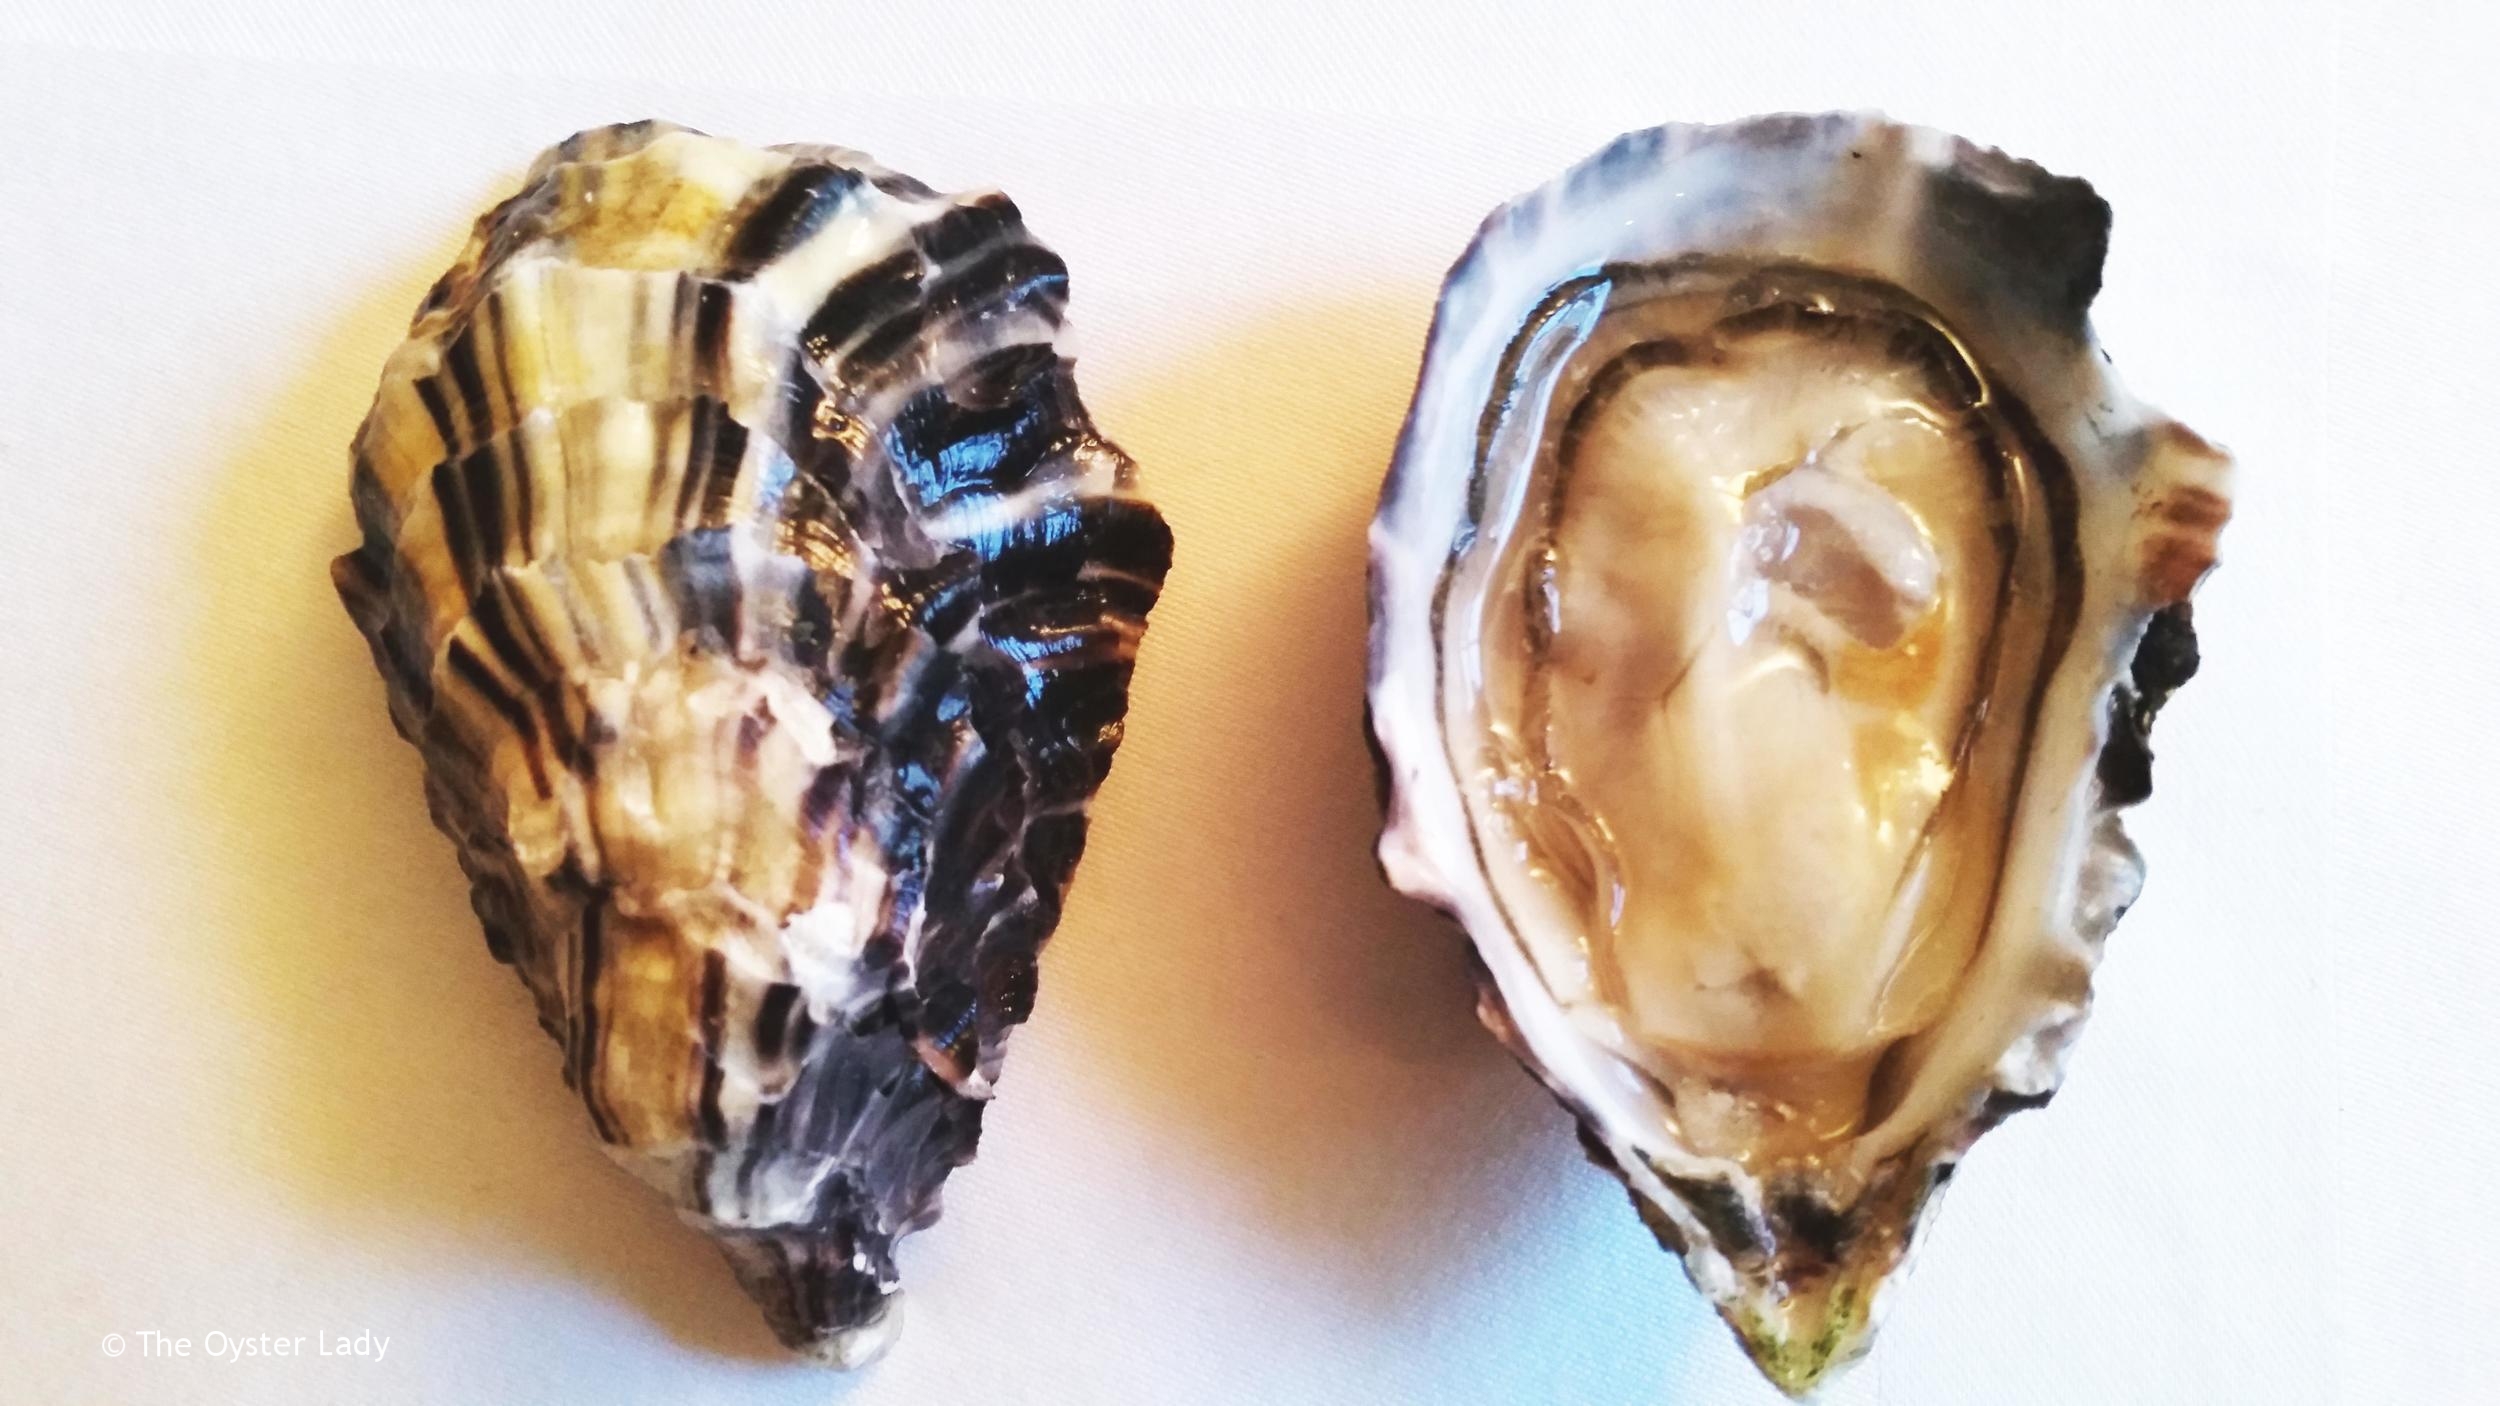      Name:  Porthilly Rock Oyster   Species:  Crassostrea gigas   Location: &nbsp;Porthilly Farm,&nbsp;Cornwall, UK      Merroir:&nbsp;&nbsp;  From the clean sandy waters of the Camel Estuary in Cornwall Porthilly Rocks have a good ratio between sali